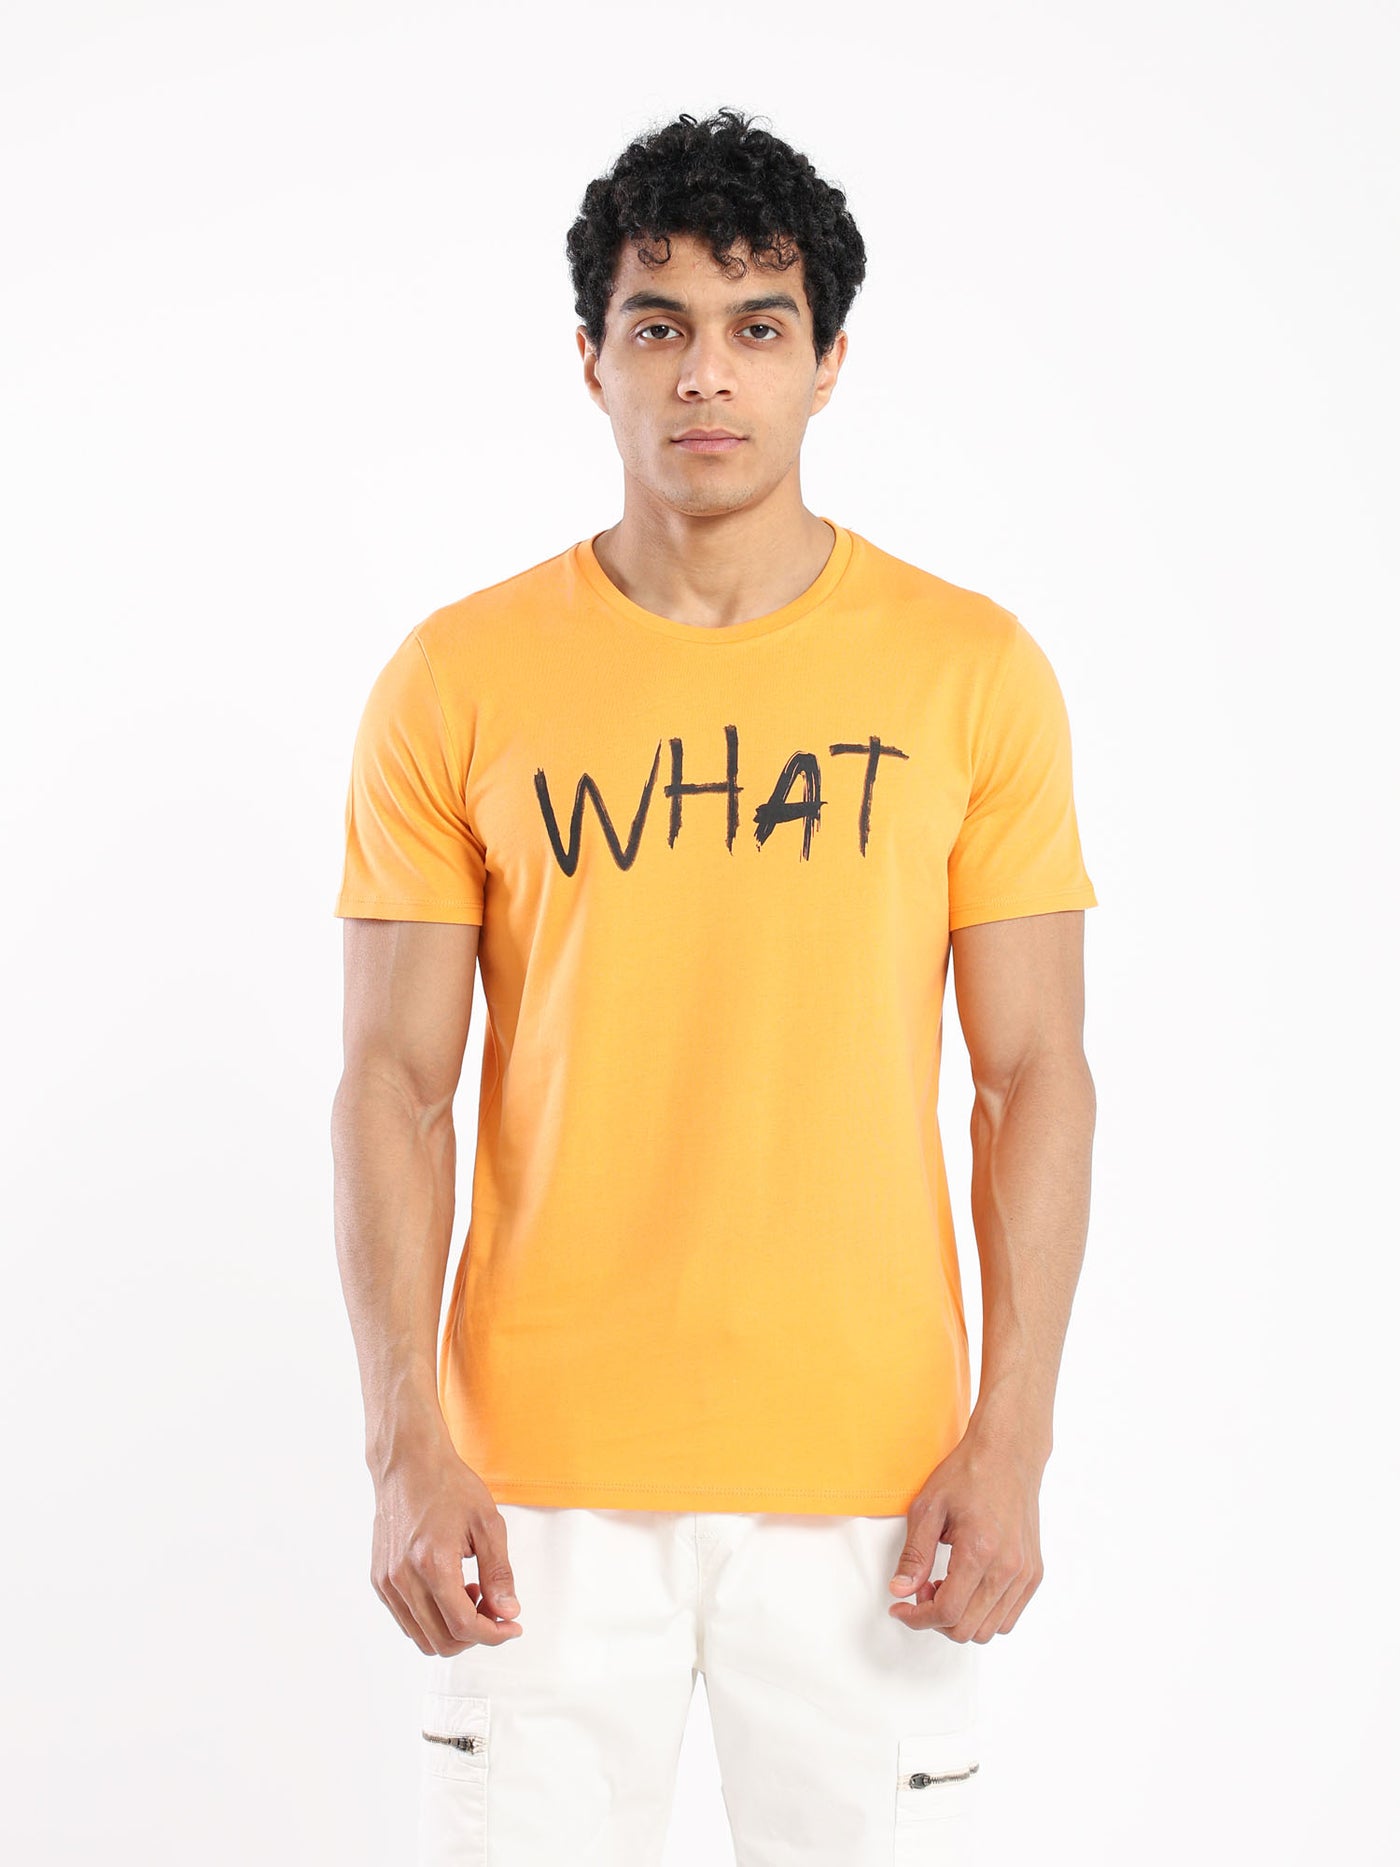 T-Shirt - "What" Front Print - Round Neck